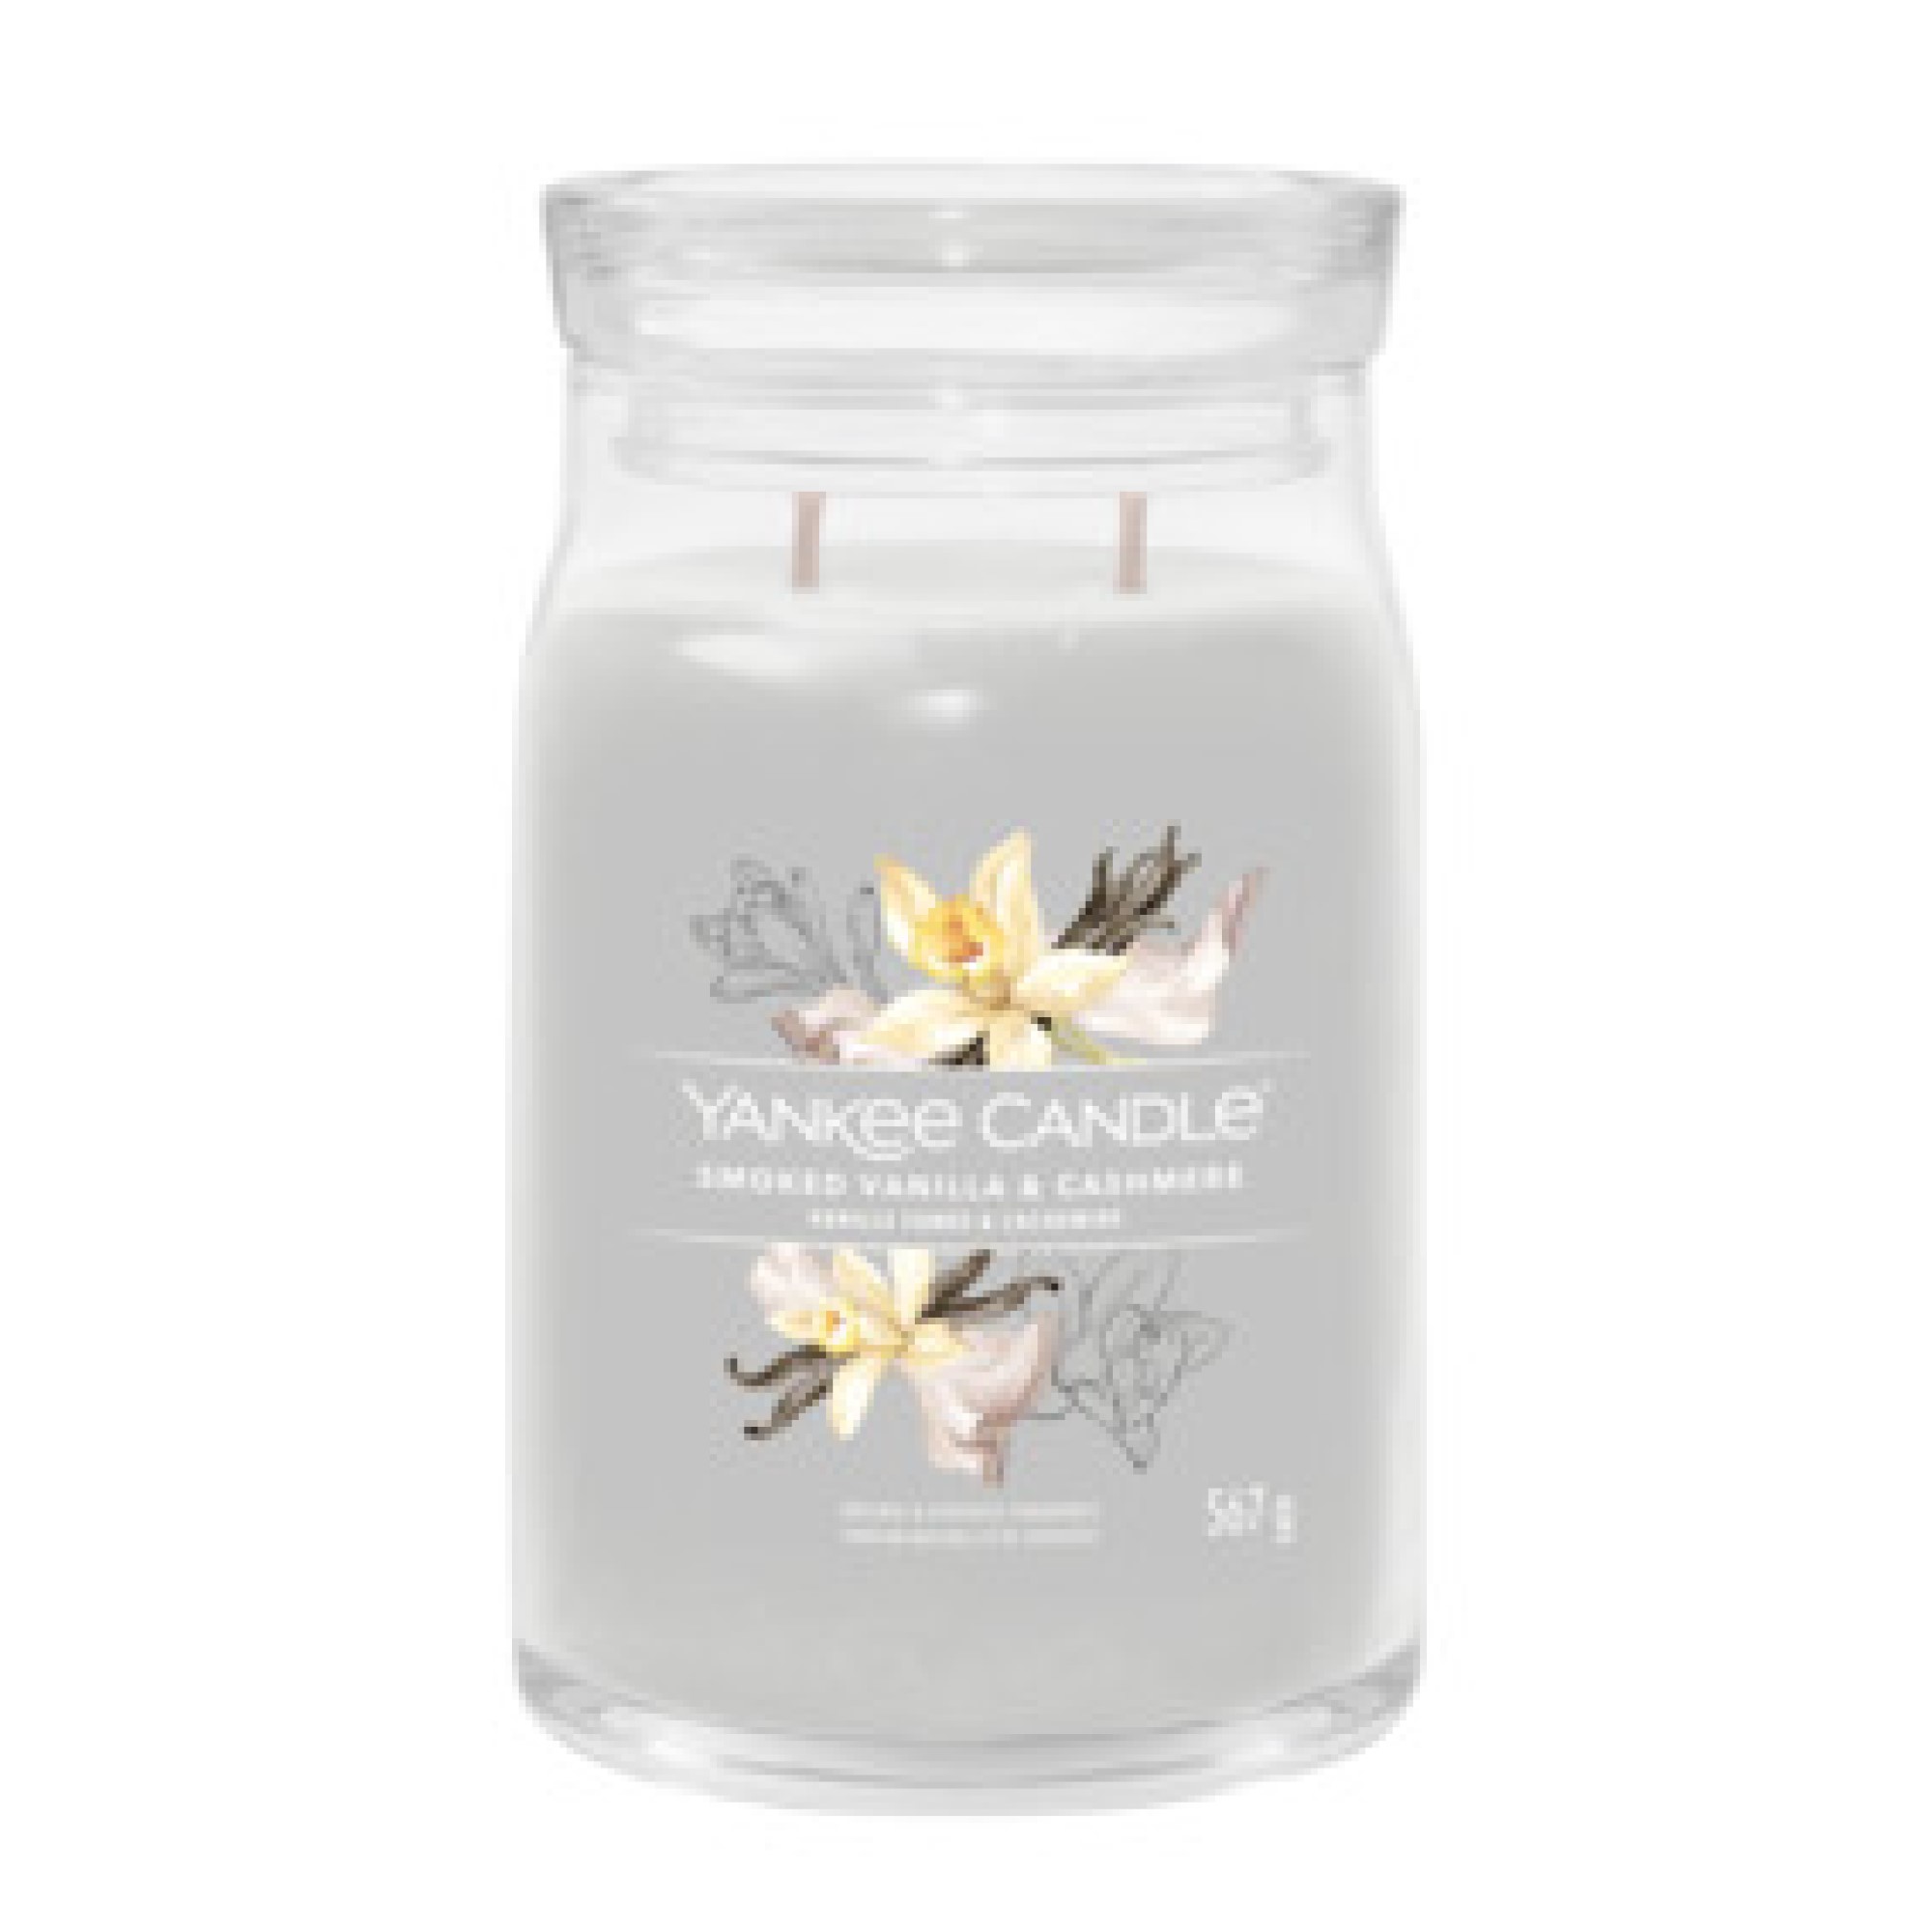 Smoked Vanilla & Cashmere- Signature Large Jar Candle - The Candle Scentre